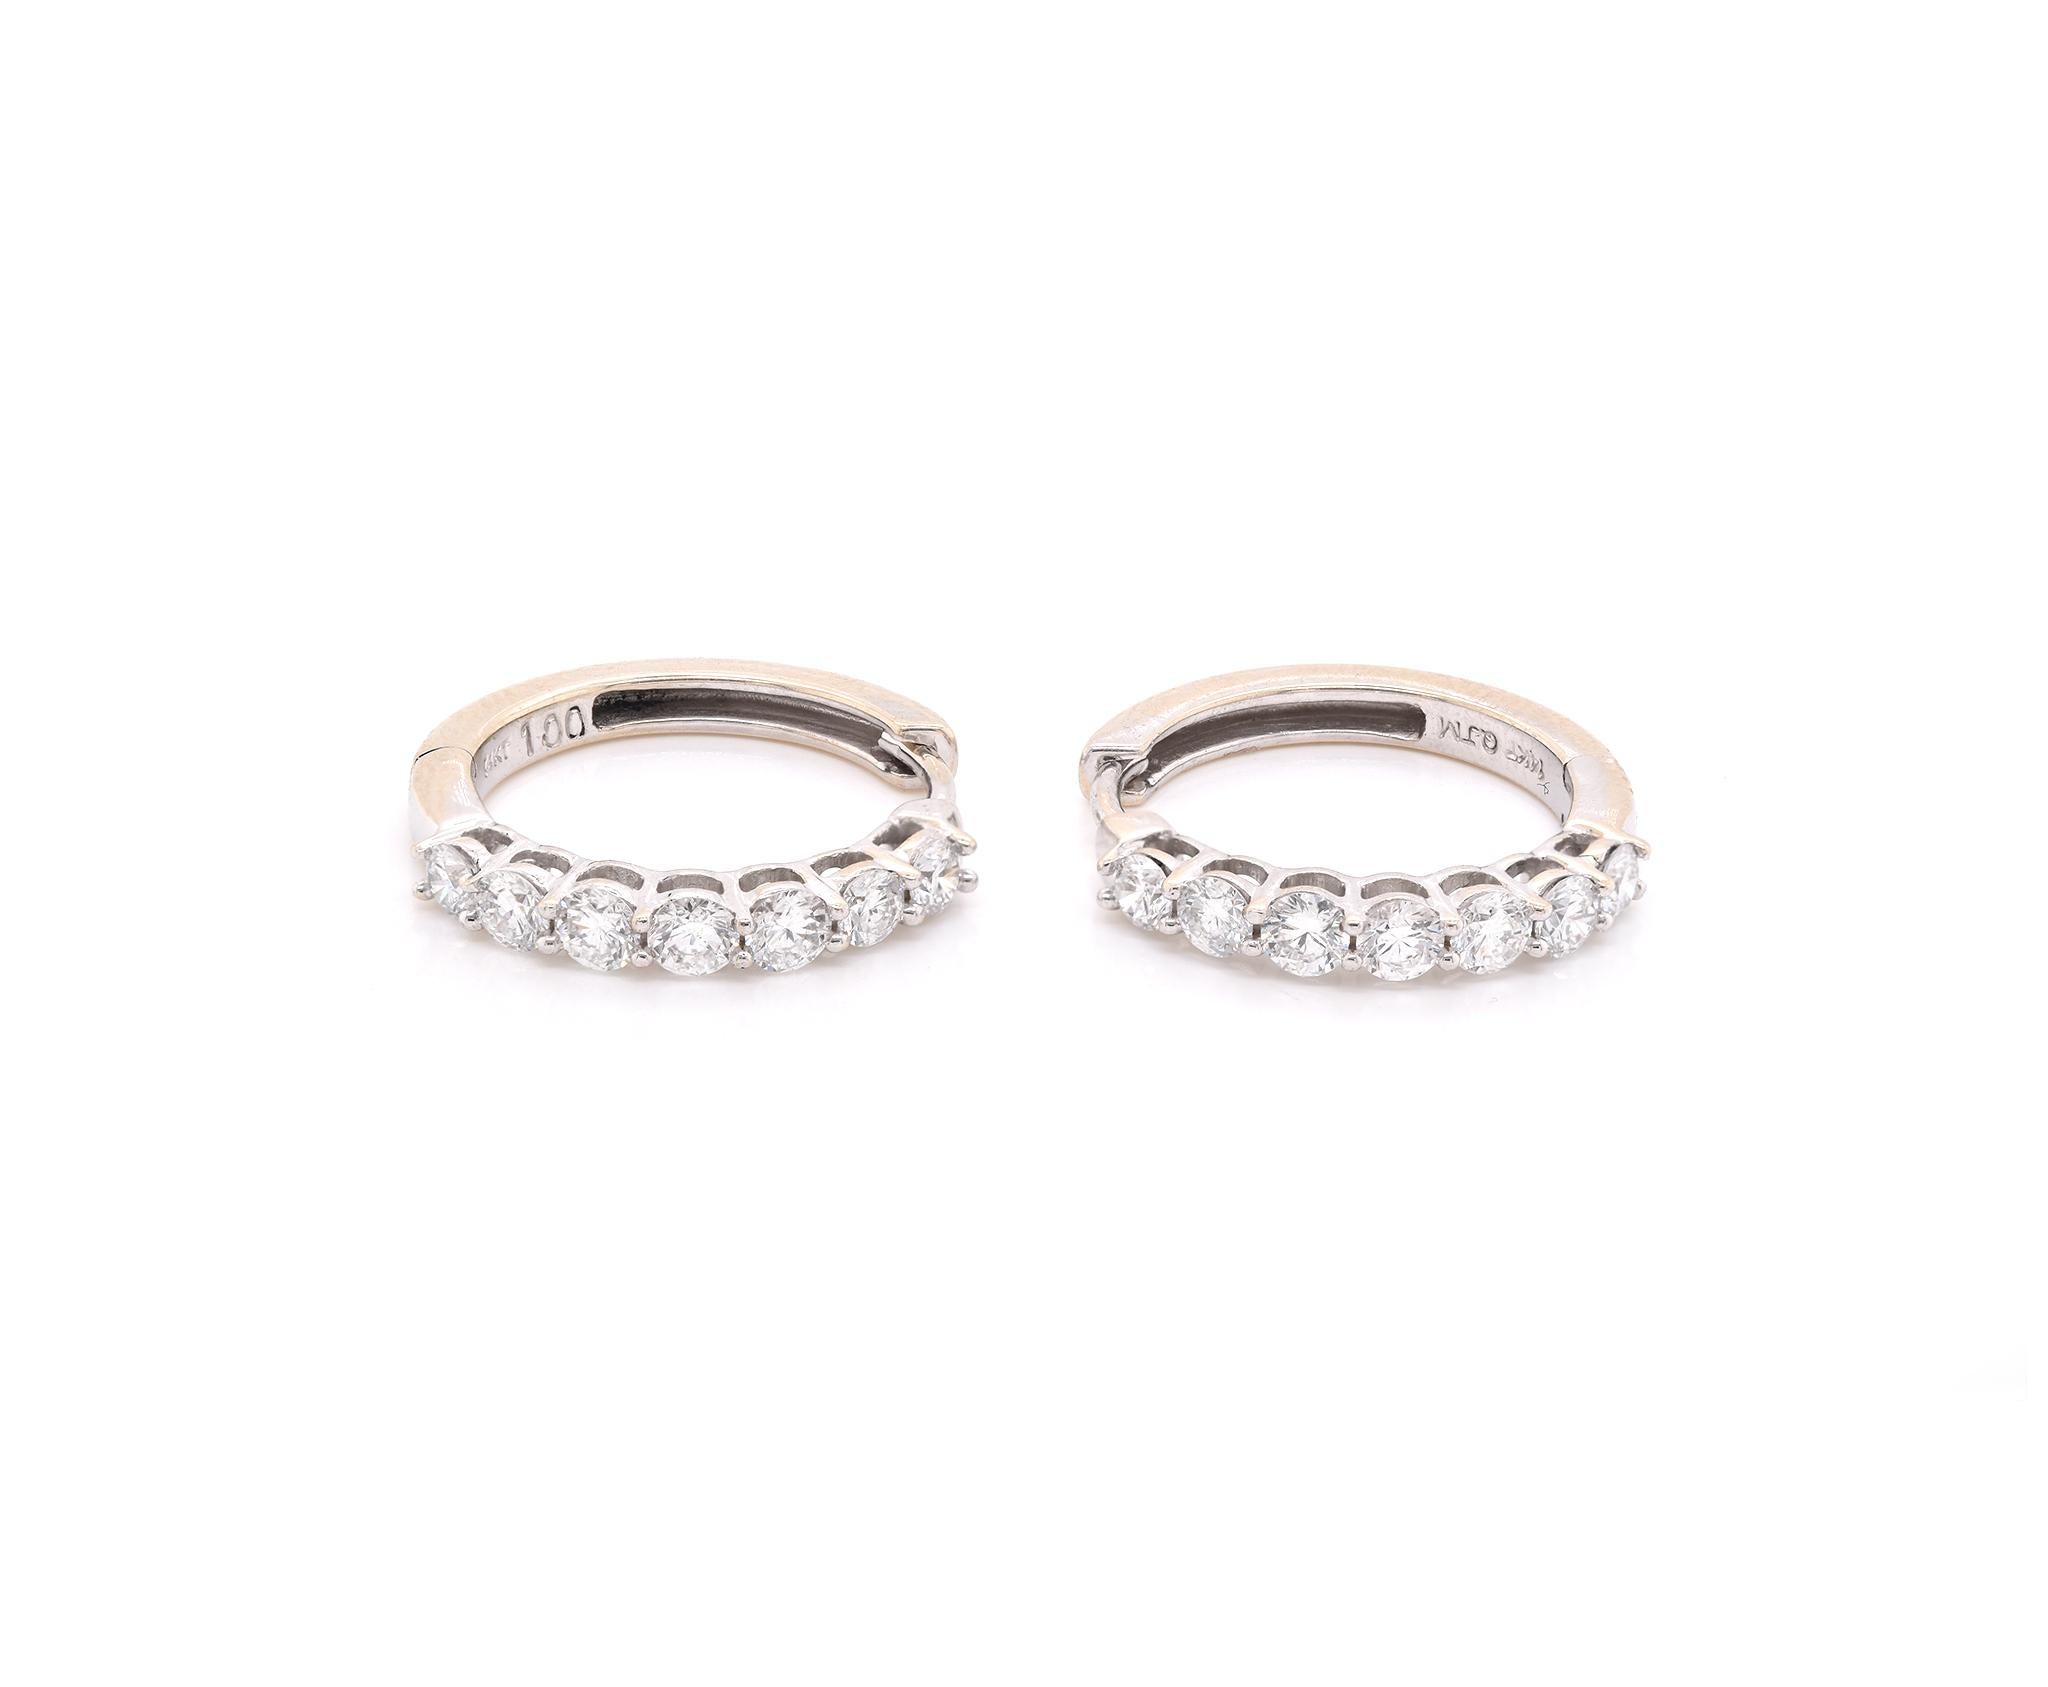 Designer: custom
Material: 14K white gold
Diamonds: 14 round brilliant cut = 1.00cttw
Color: G
Clarity: SI1
Dimensions: earrings measure 18mm long
Weight: 4.33 grams
